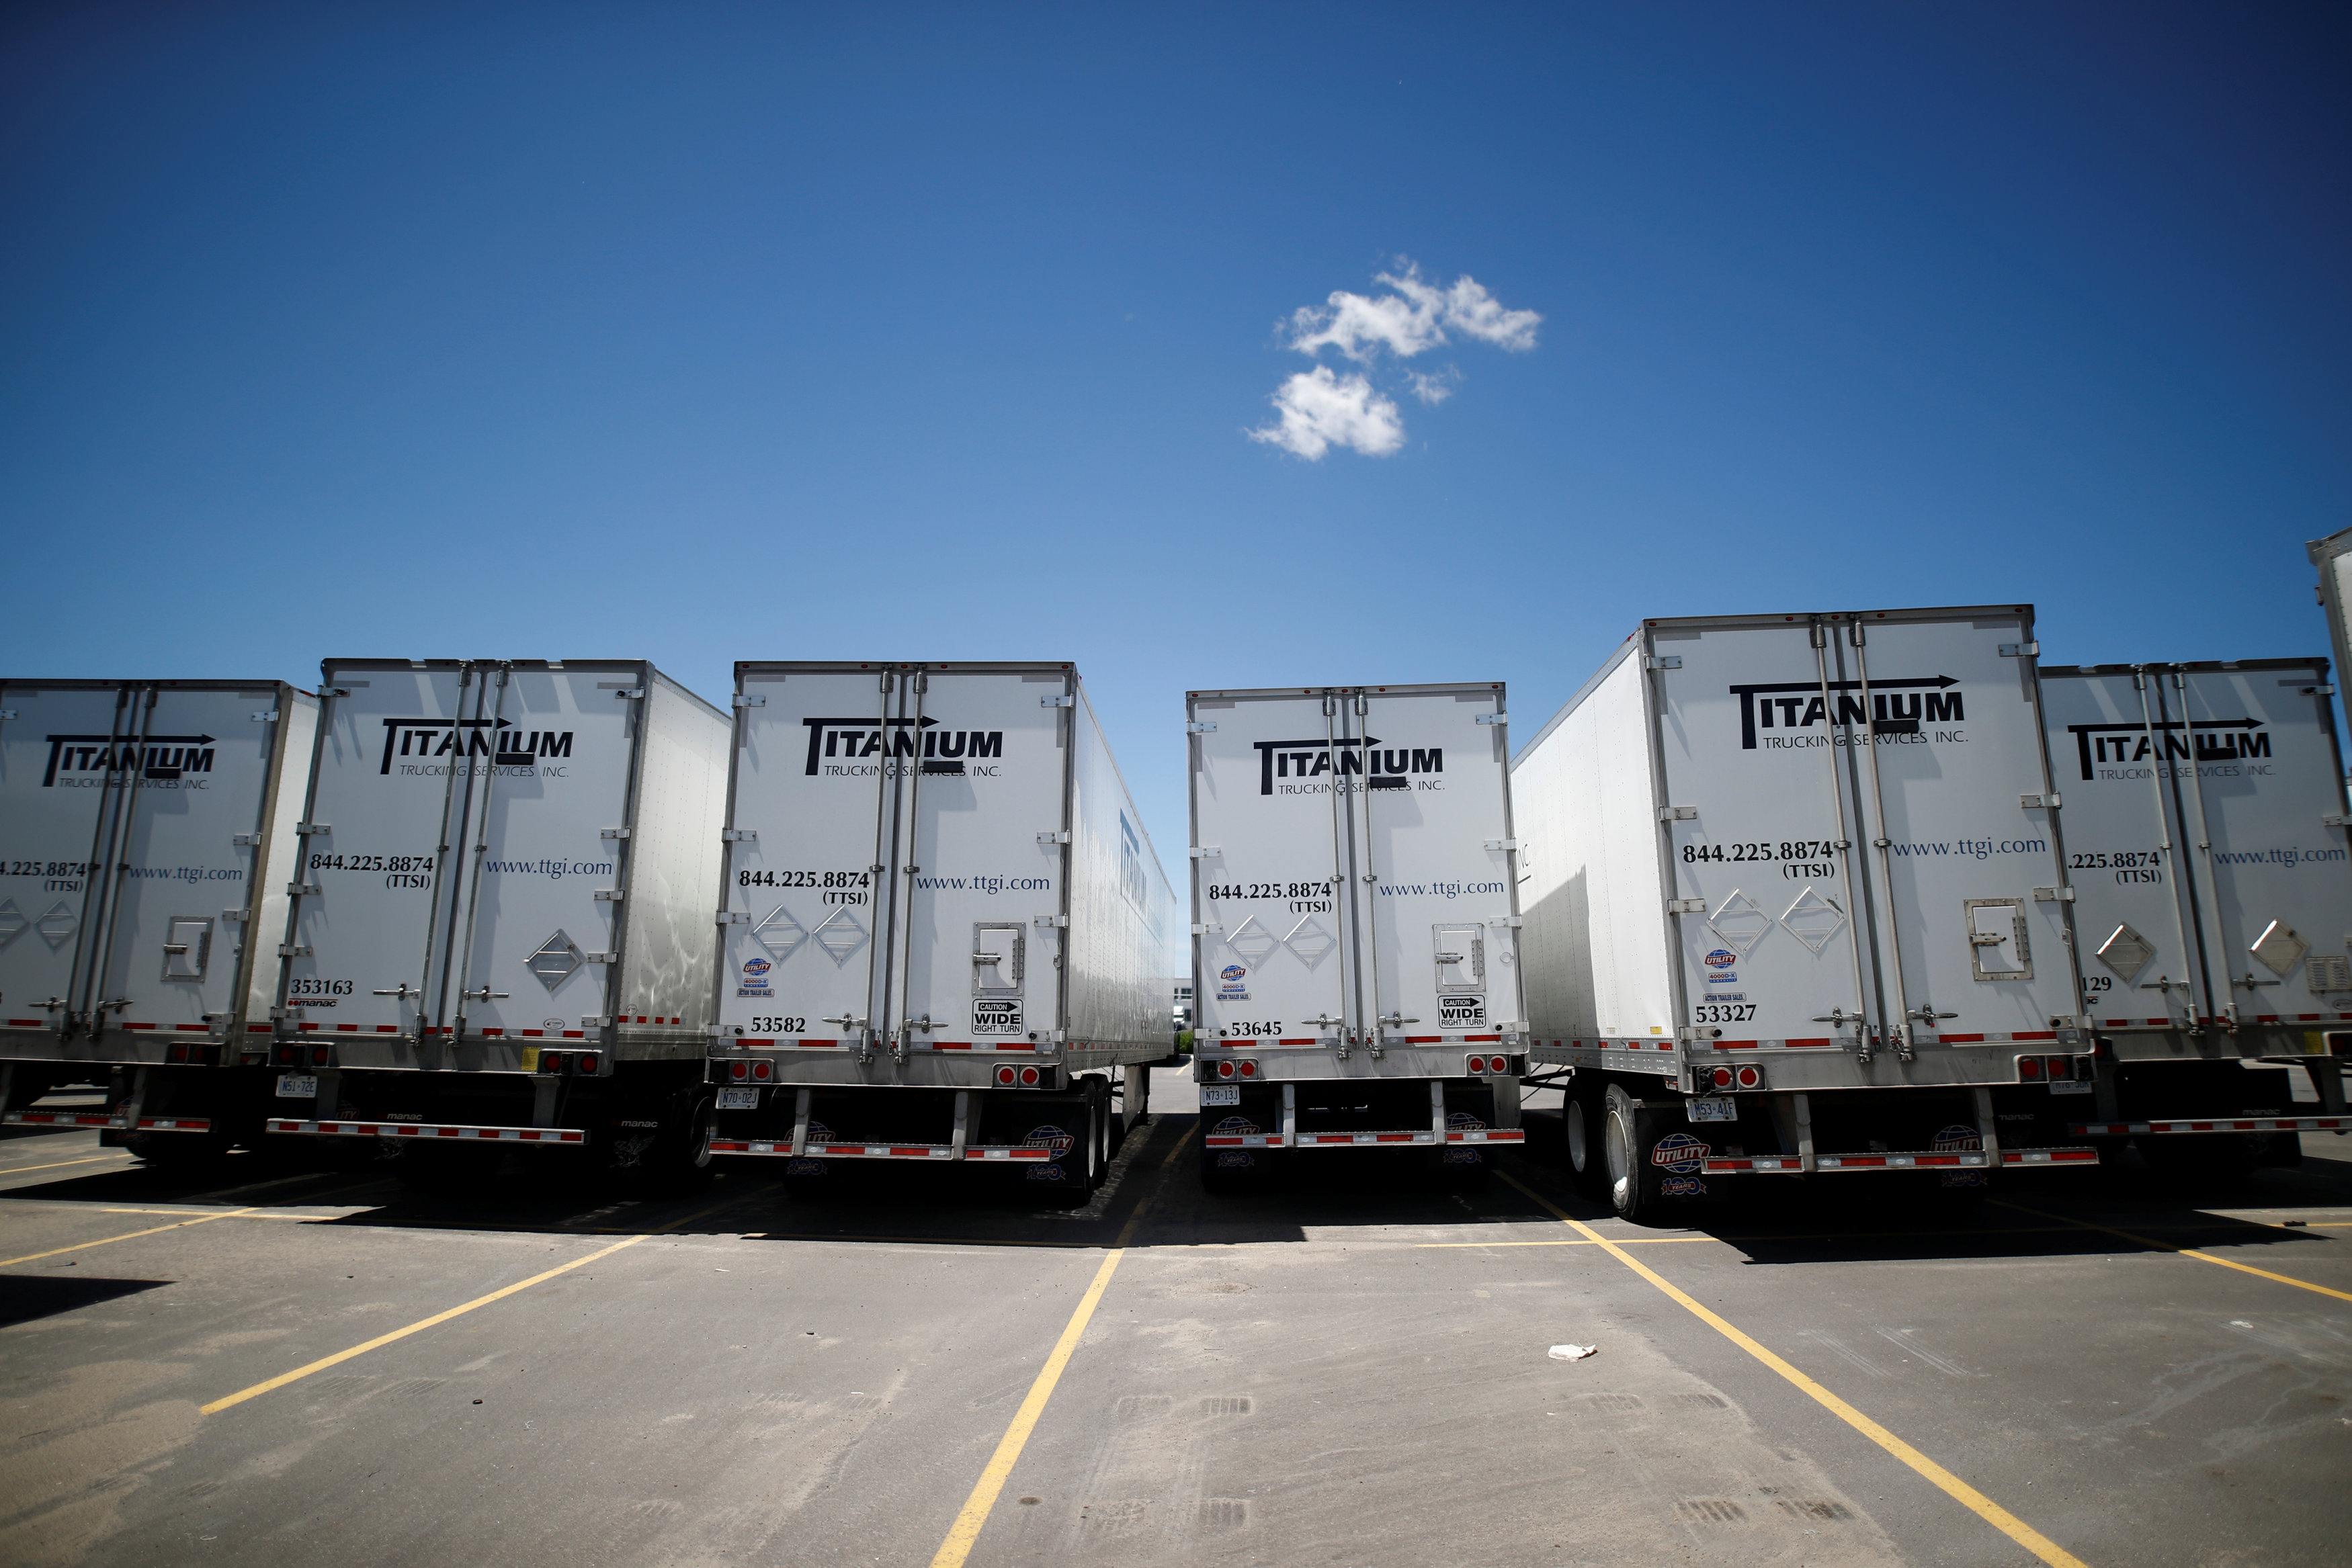 Trailers sit in a lot equipped with "BlackBerry Radar" boxes, that perform a fleet-tracking service which uses $400 boxes to collect and transmit information on movement, temperature and physical contents of truck trailers, at the Titanium Transportation trucking firm in Bolton, Ontario, Canada on June 7, 2017. Picture taken on June 7, 2017.    REUTERS/Mark Blinch